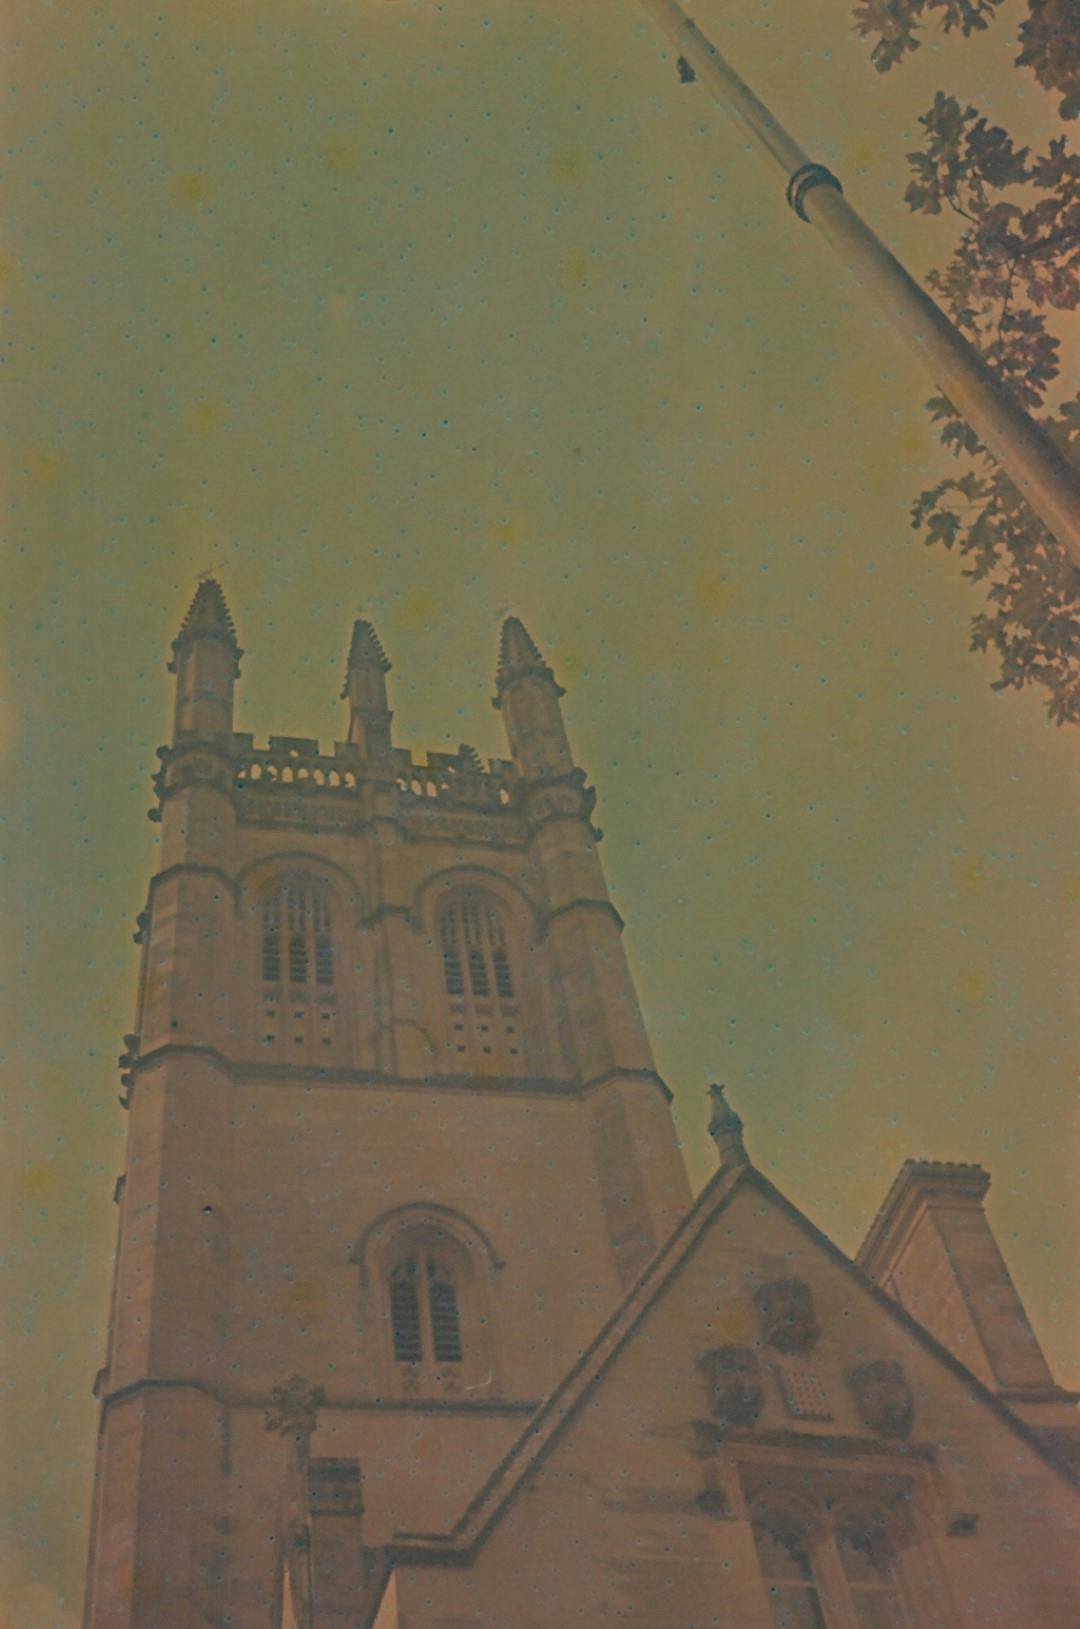 Old church in Oxford, England shot on expired film